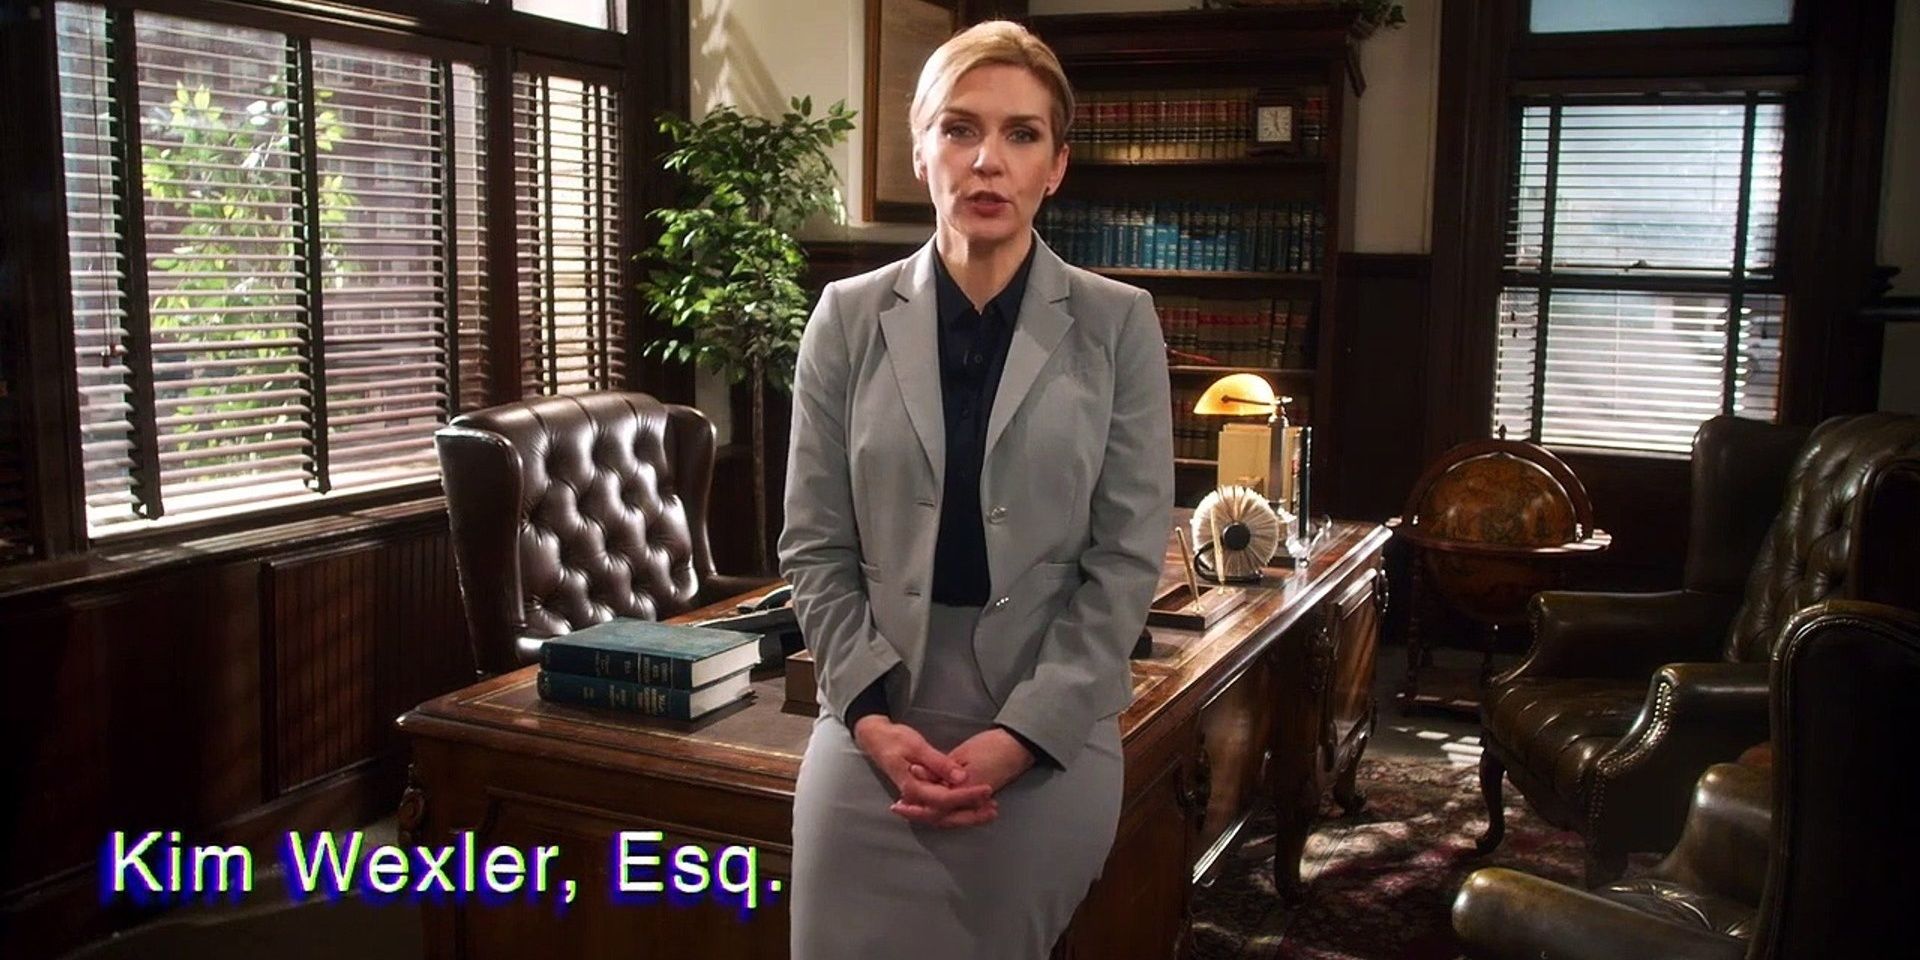 Kim in the web series, Ethics Training with Kim Wexler 